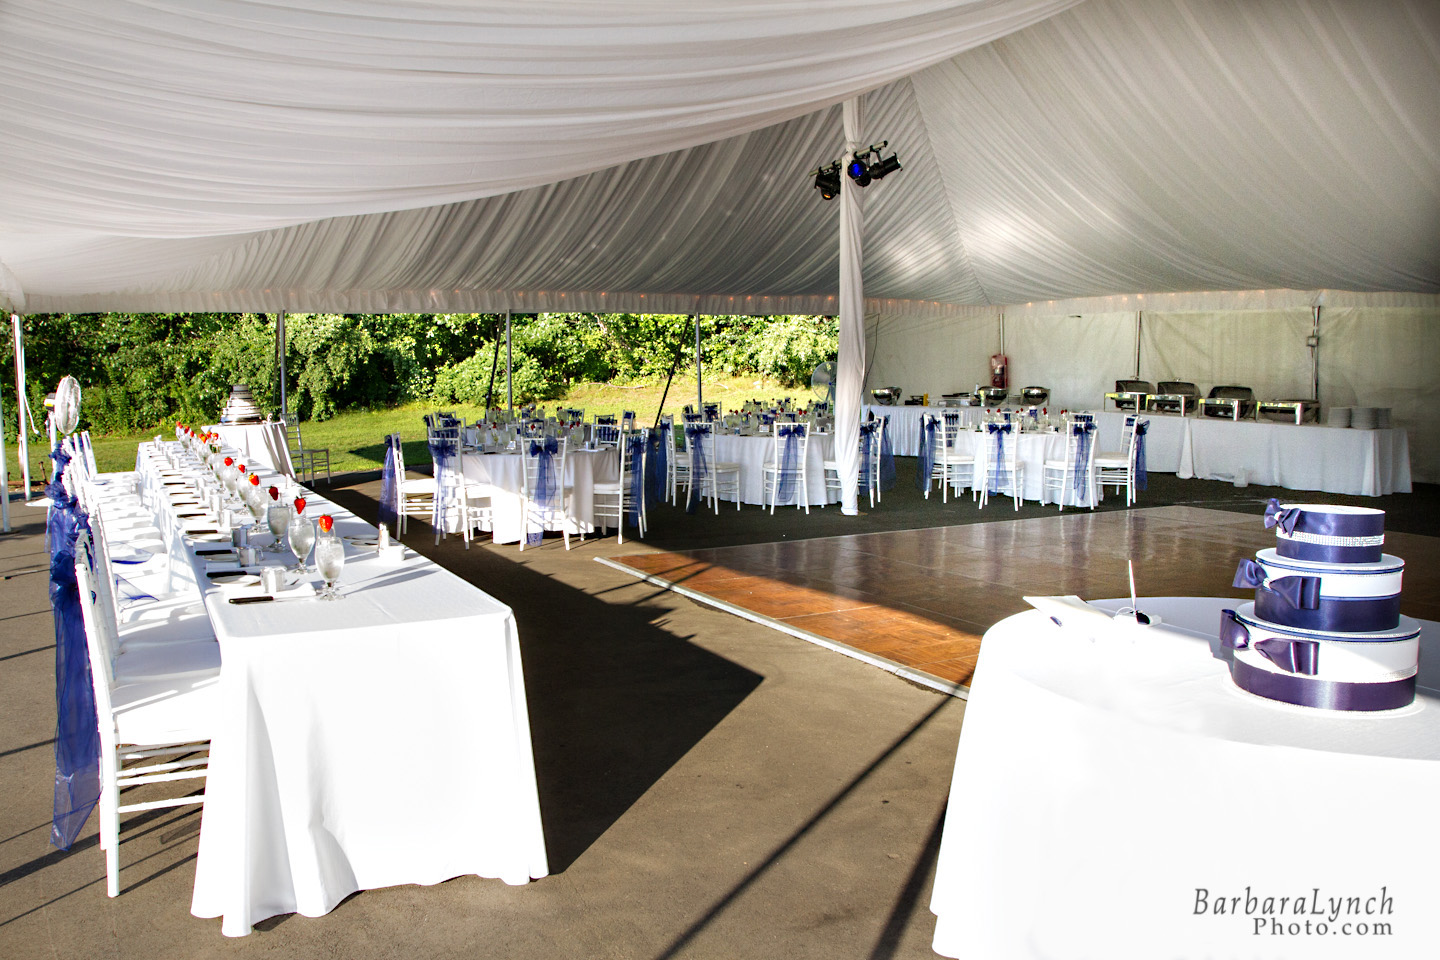 Full Gathered Tent Liner with Par Can Spot Lights and Parquet Dance Floor in a Pole Tent